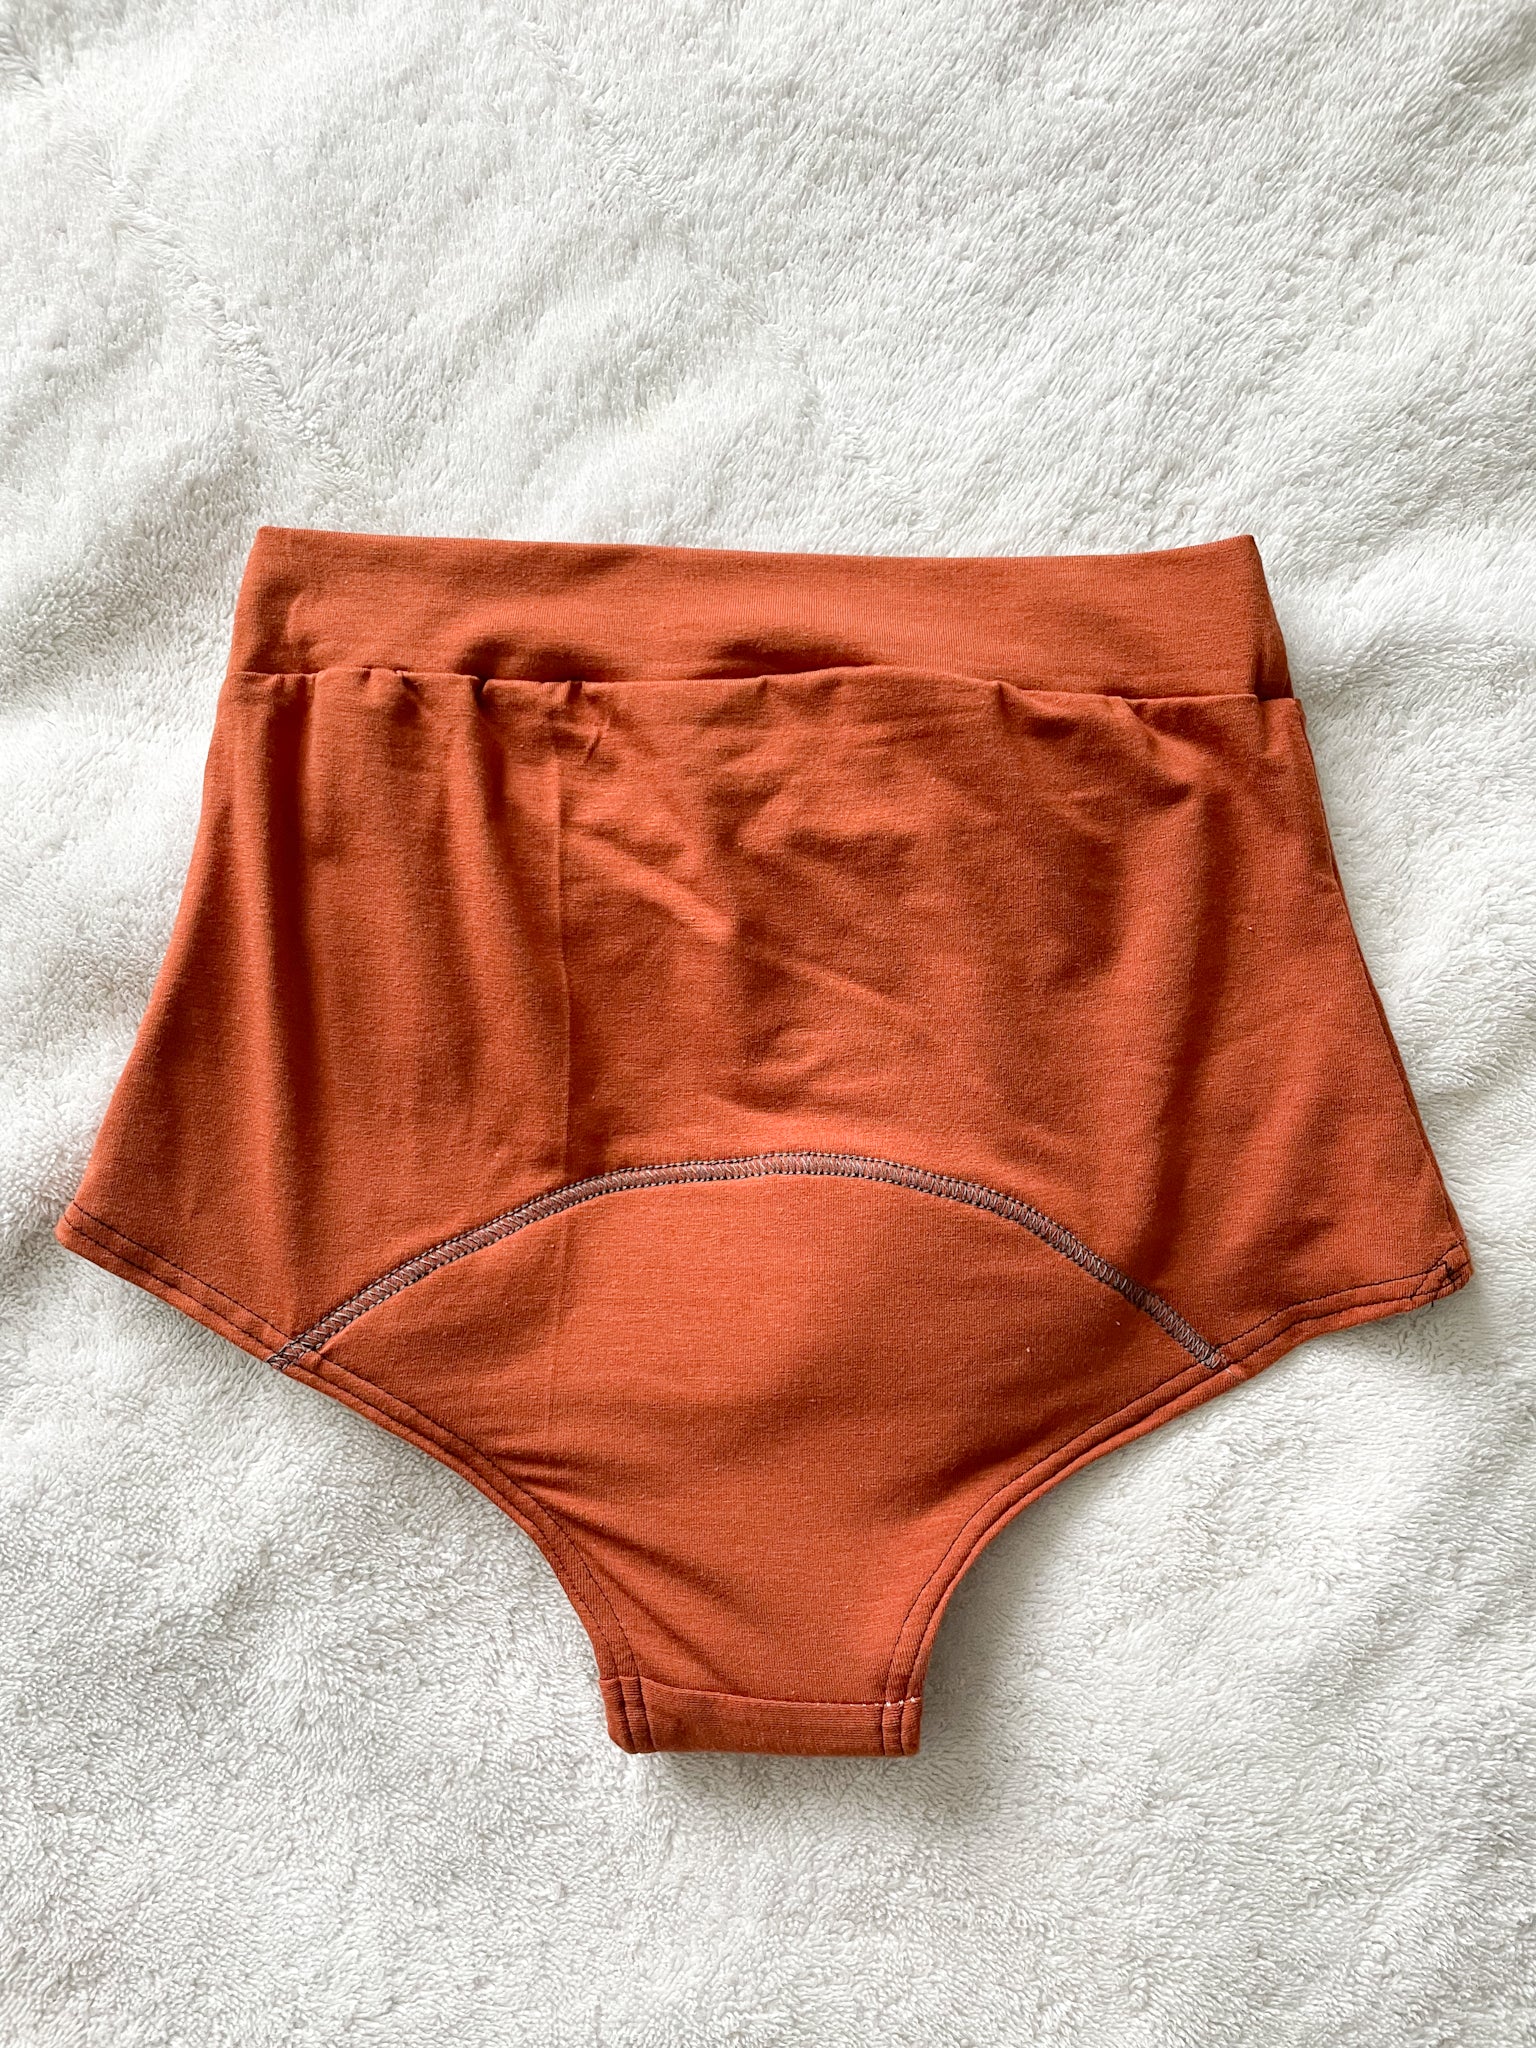 Don't knock it until you try it. Reusable Period Underwear is a